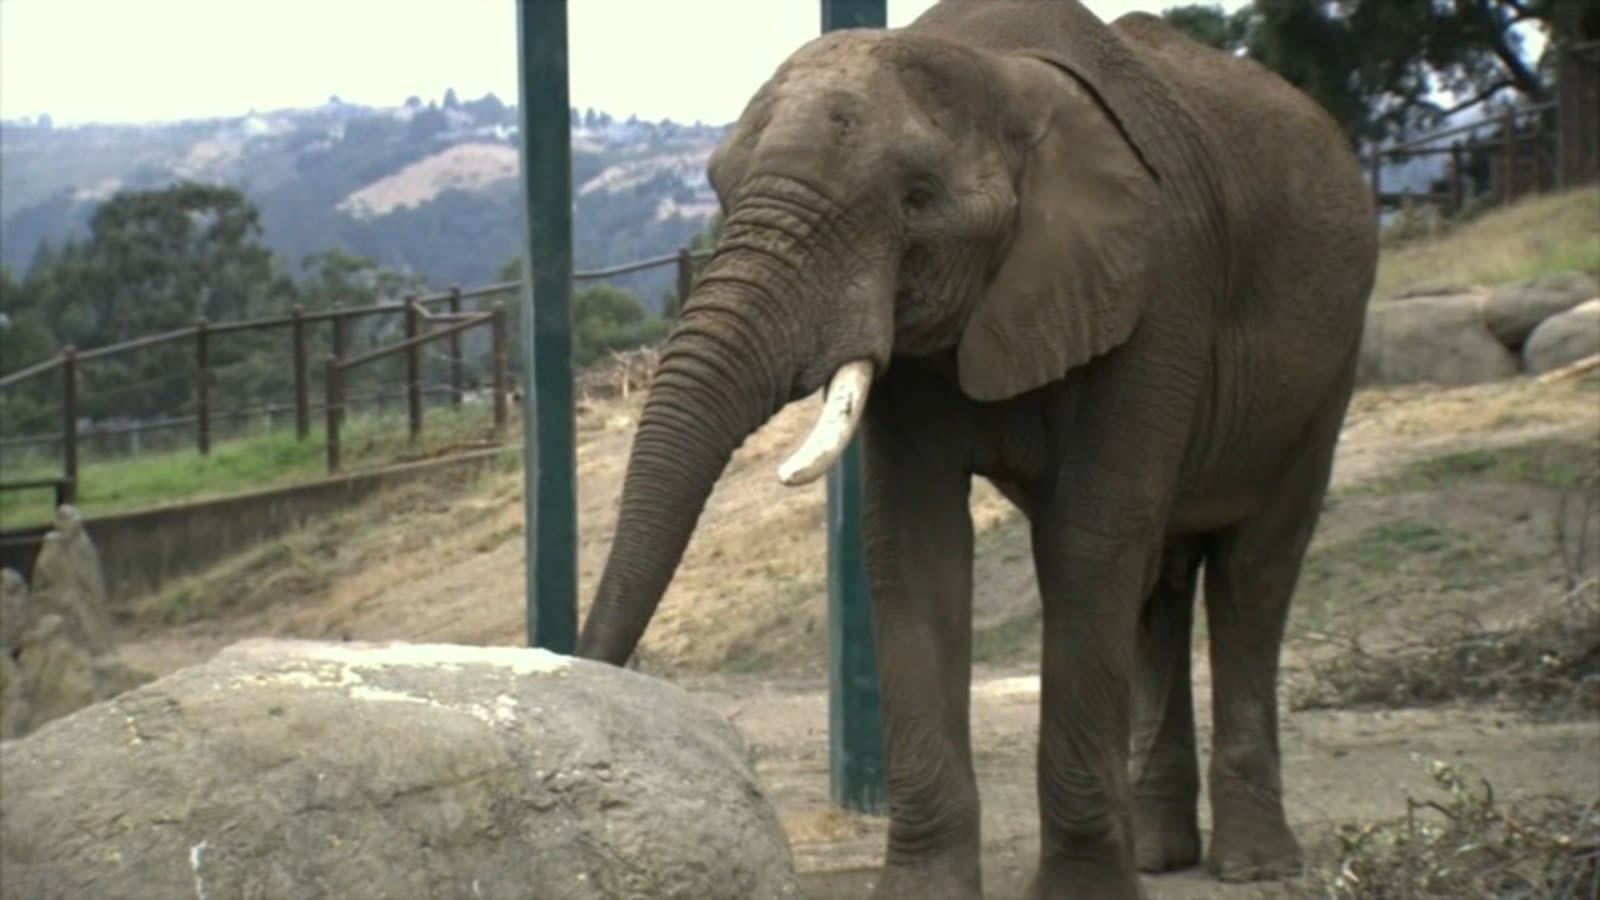 Bay Area's last remaining African elephant moving to be reunited with old companion